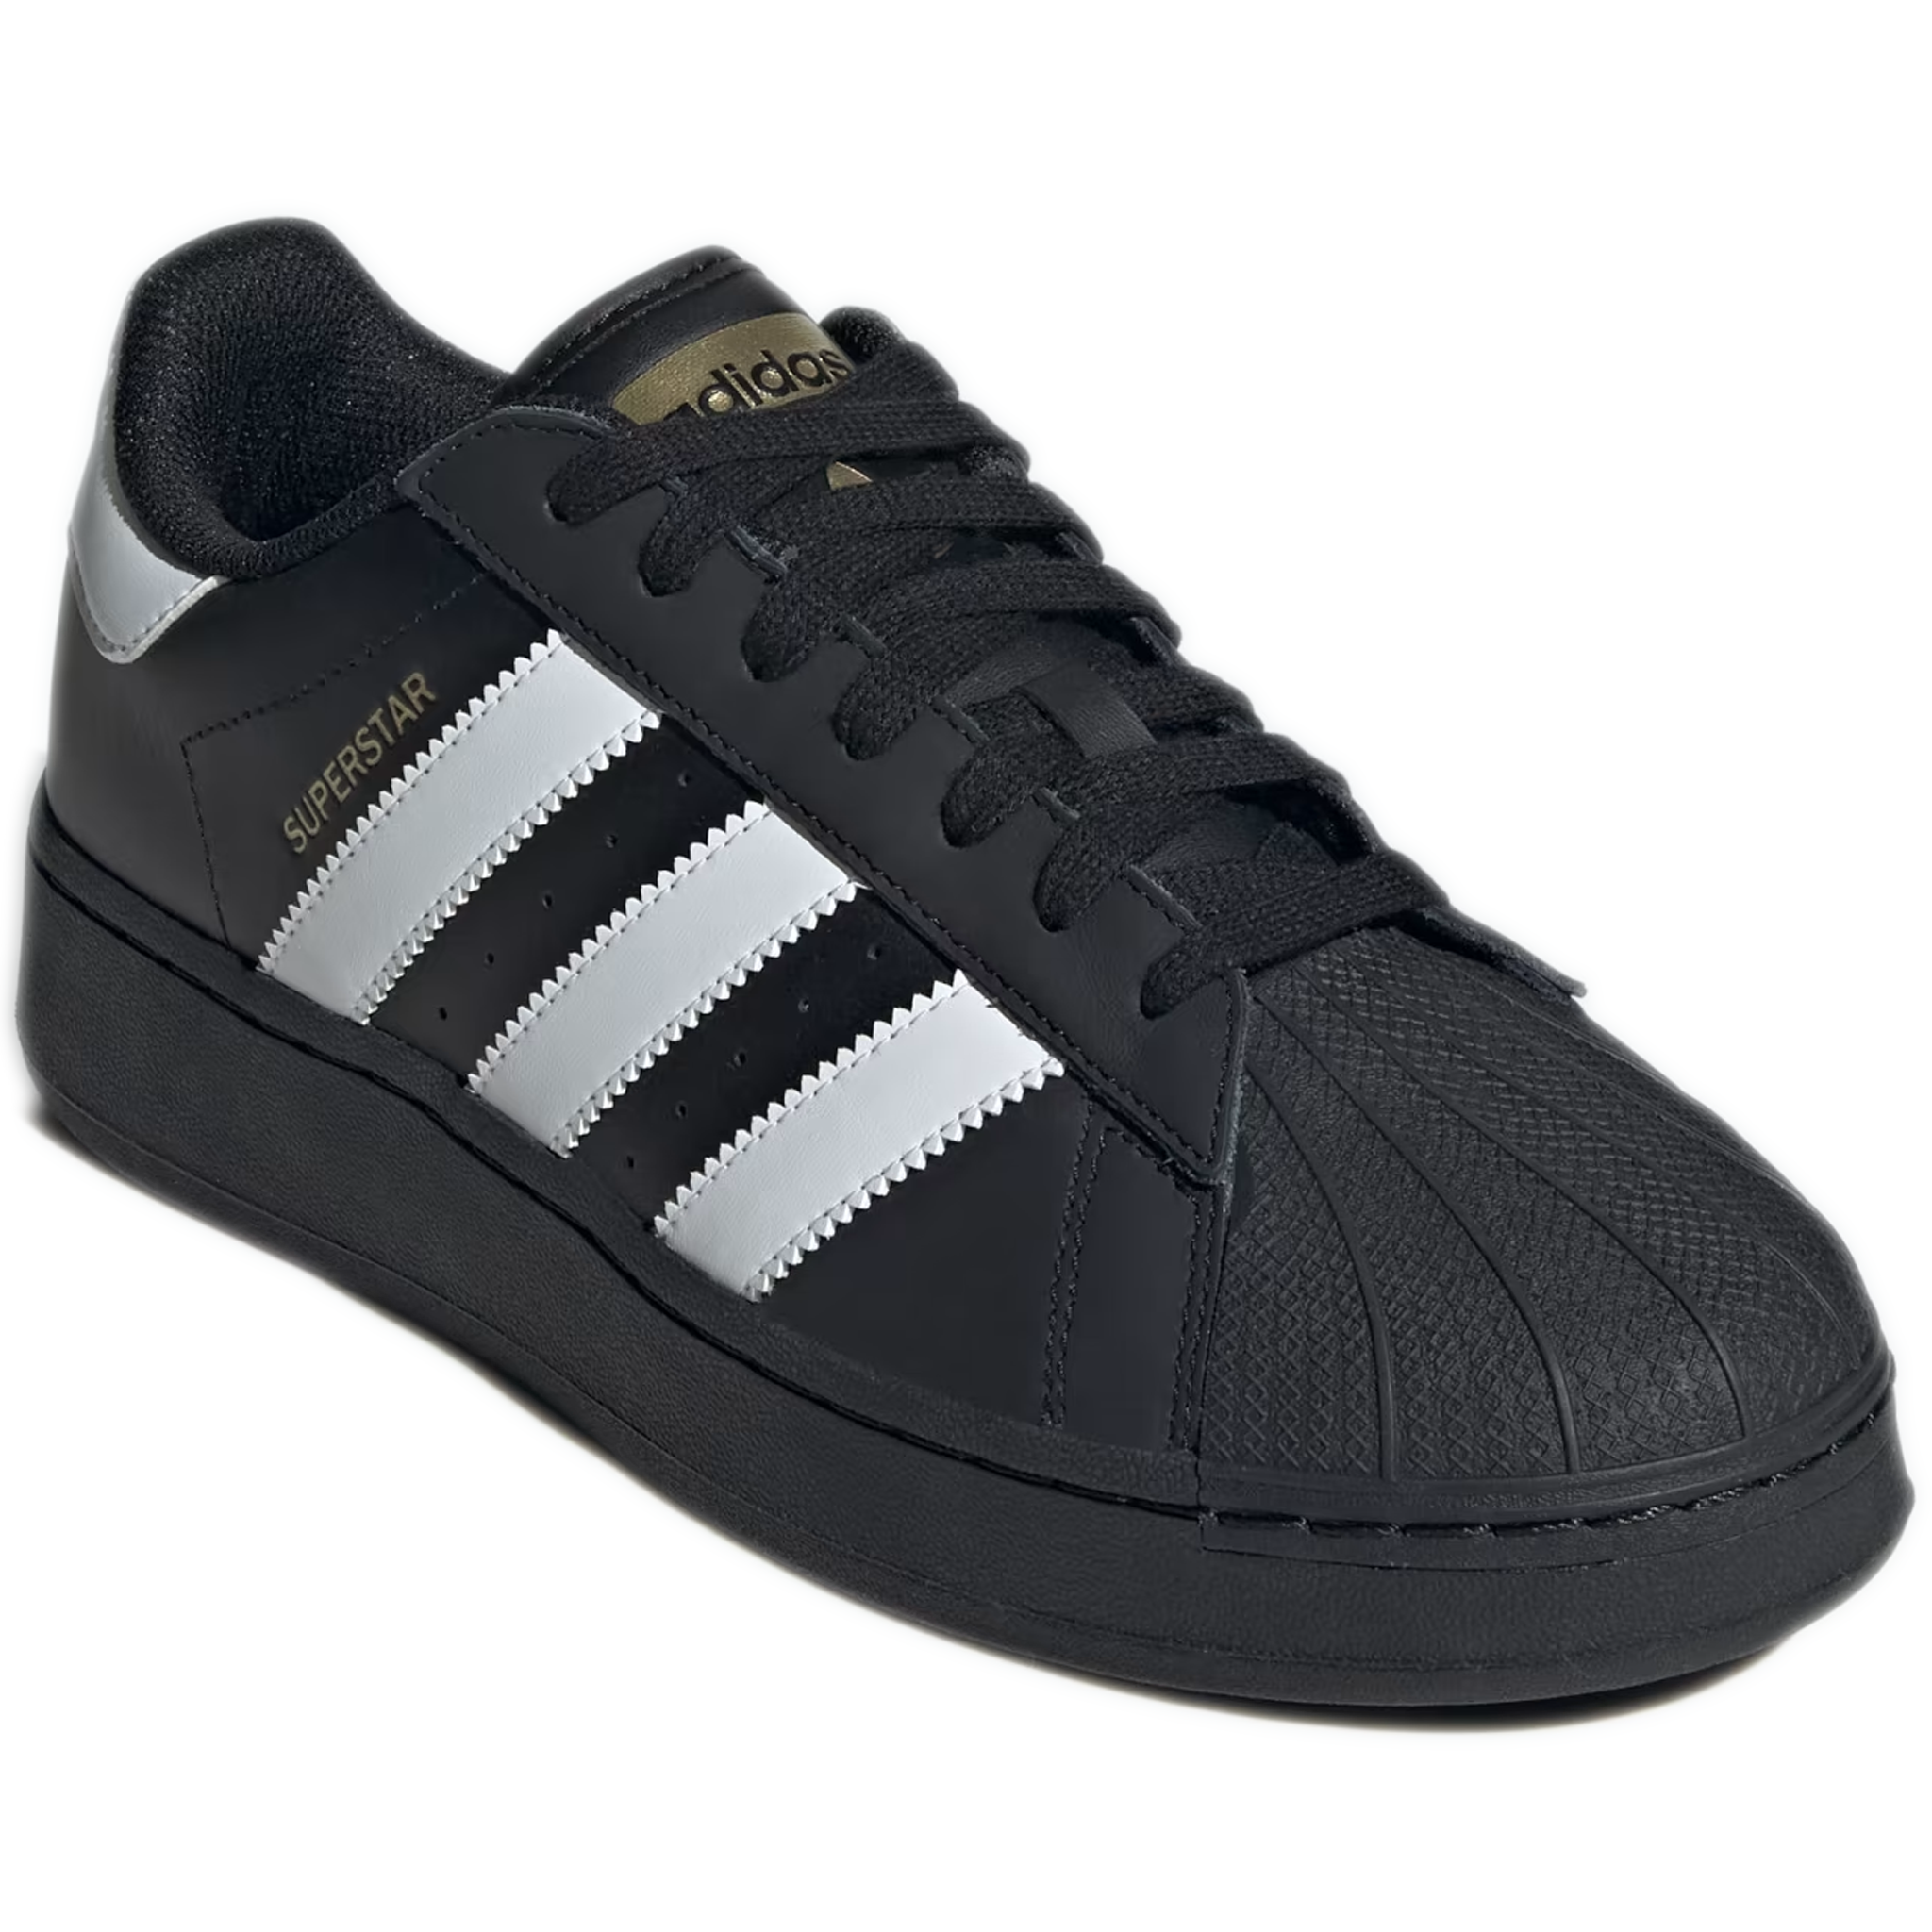 adidas superstar trainers black and white